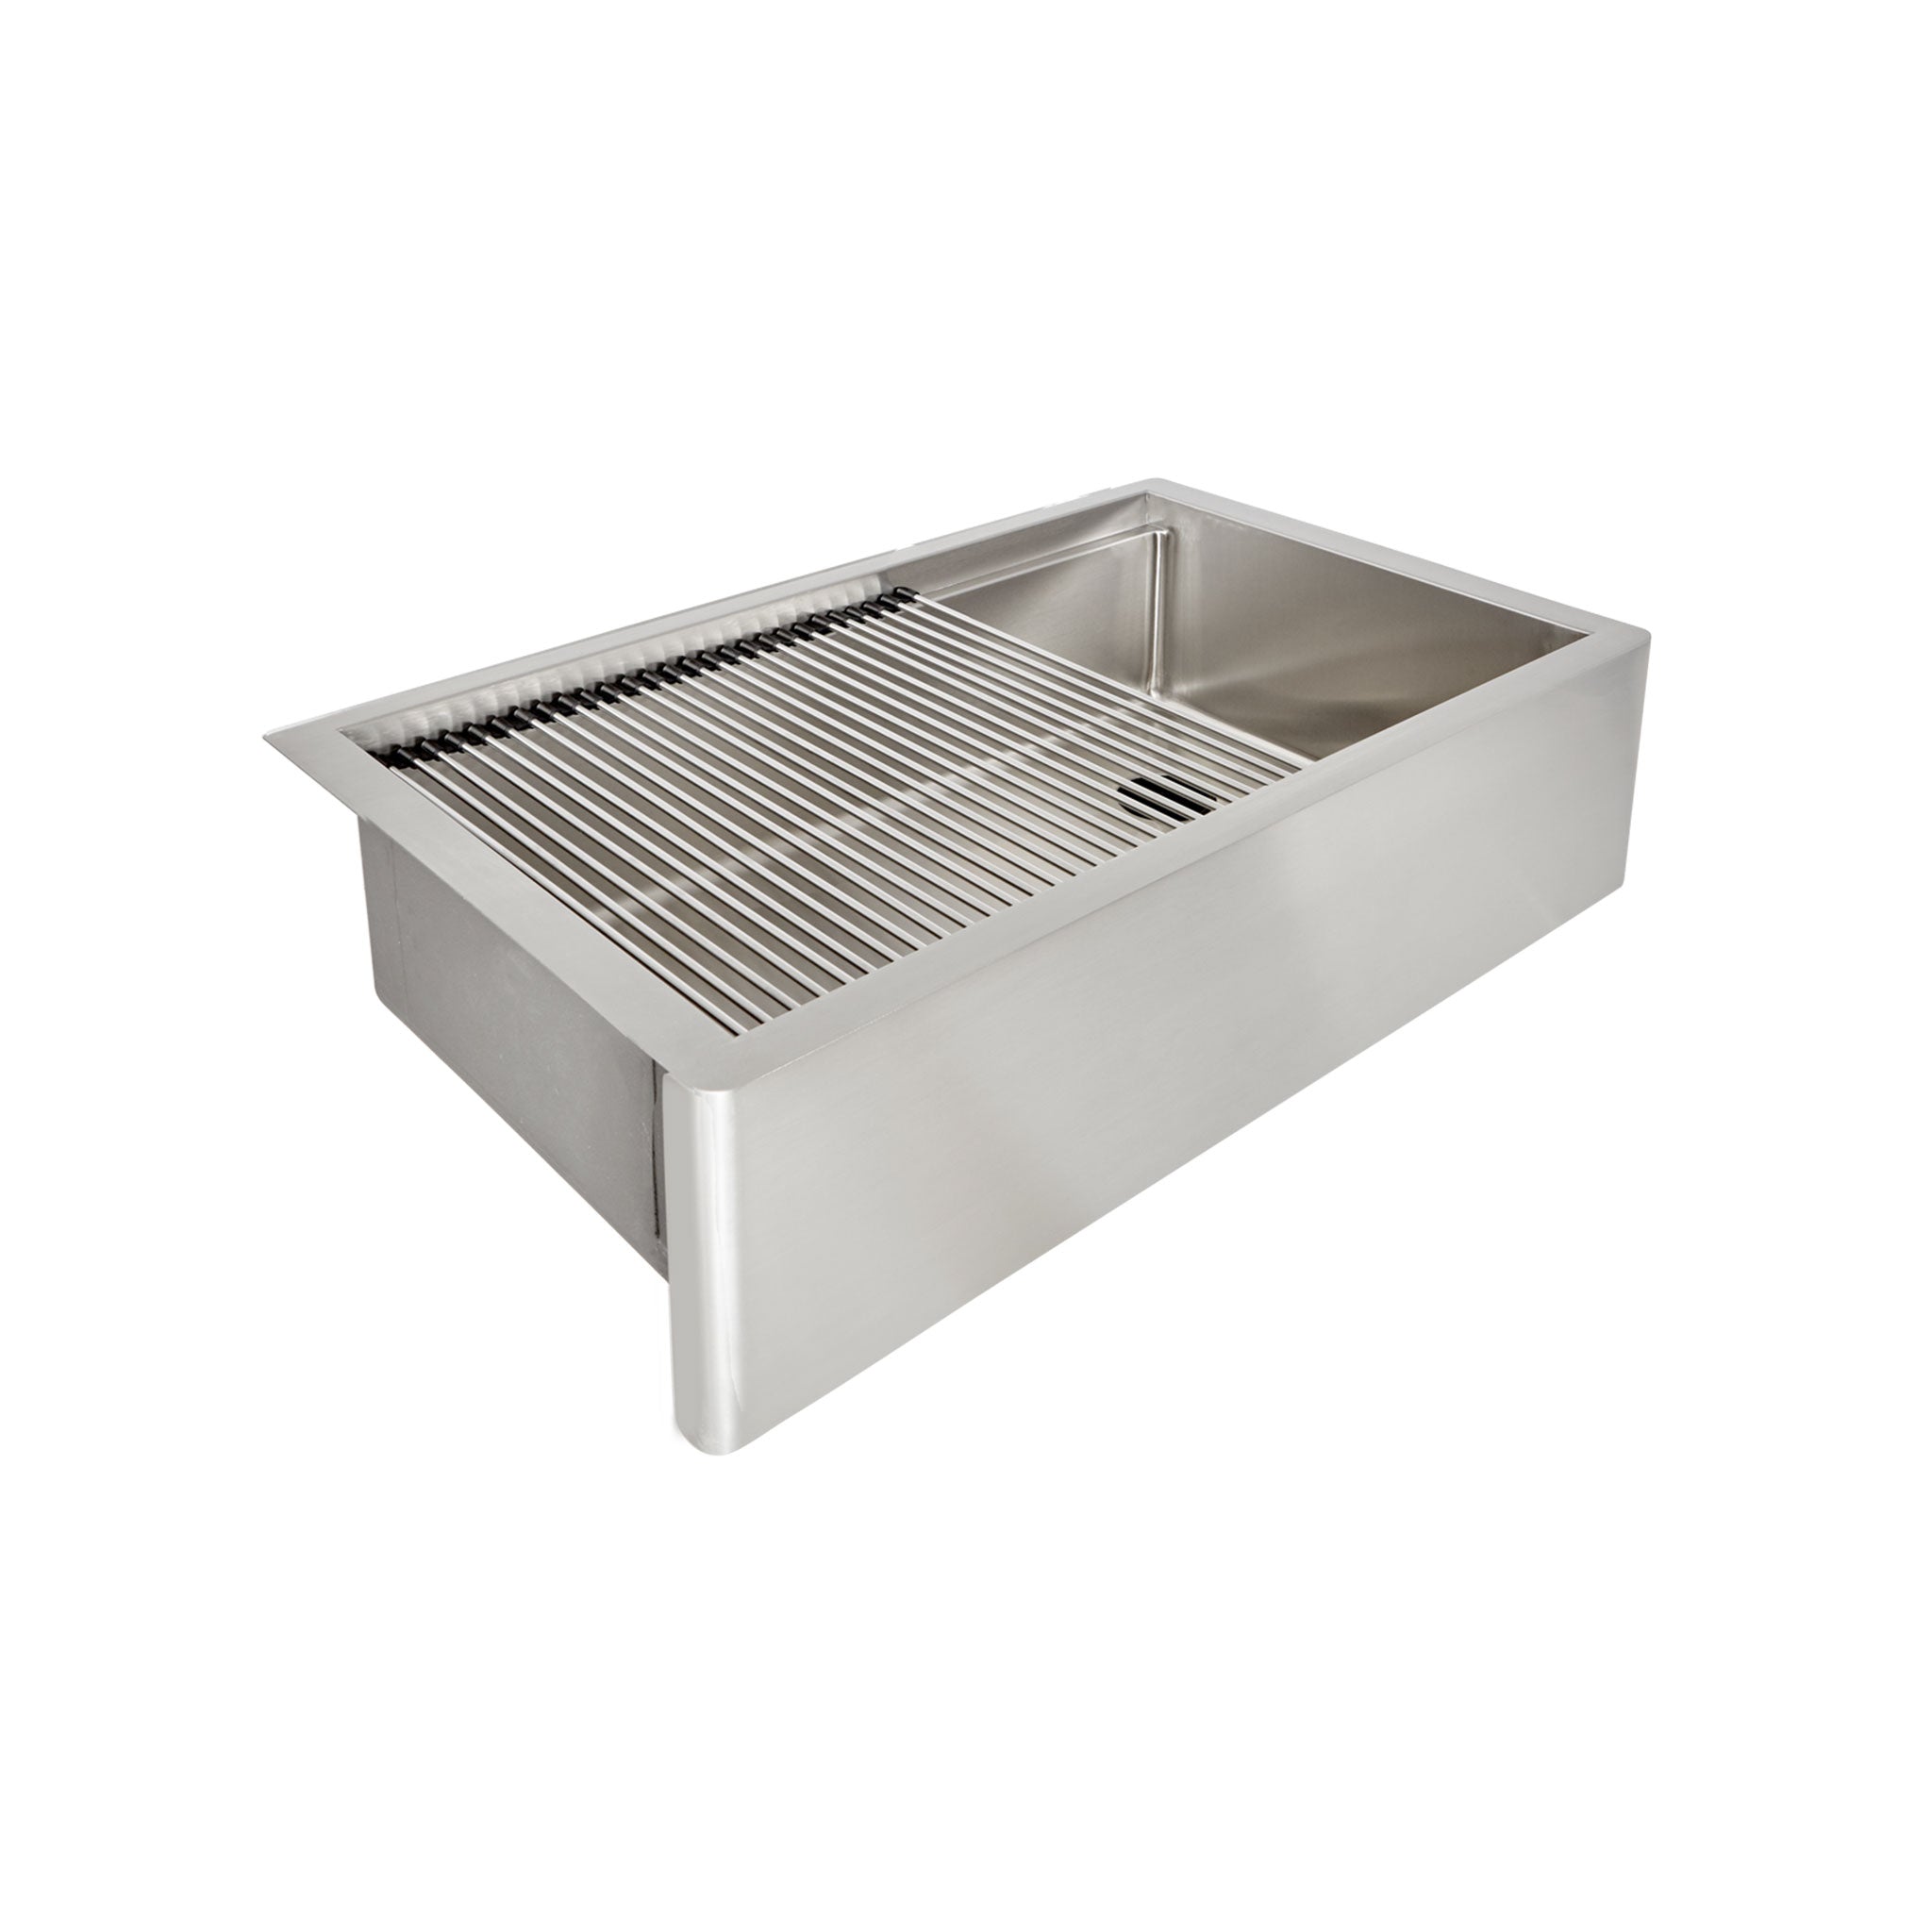 Steel bars accessory in a stainless steel, farmhouse, kitchen sink.